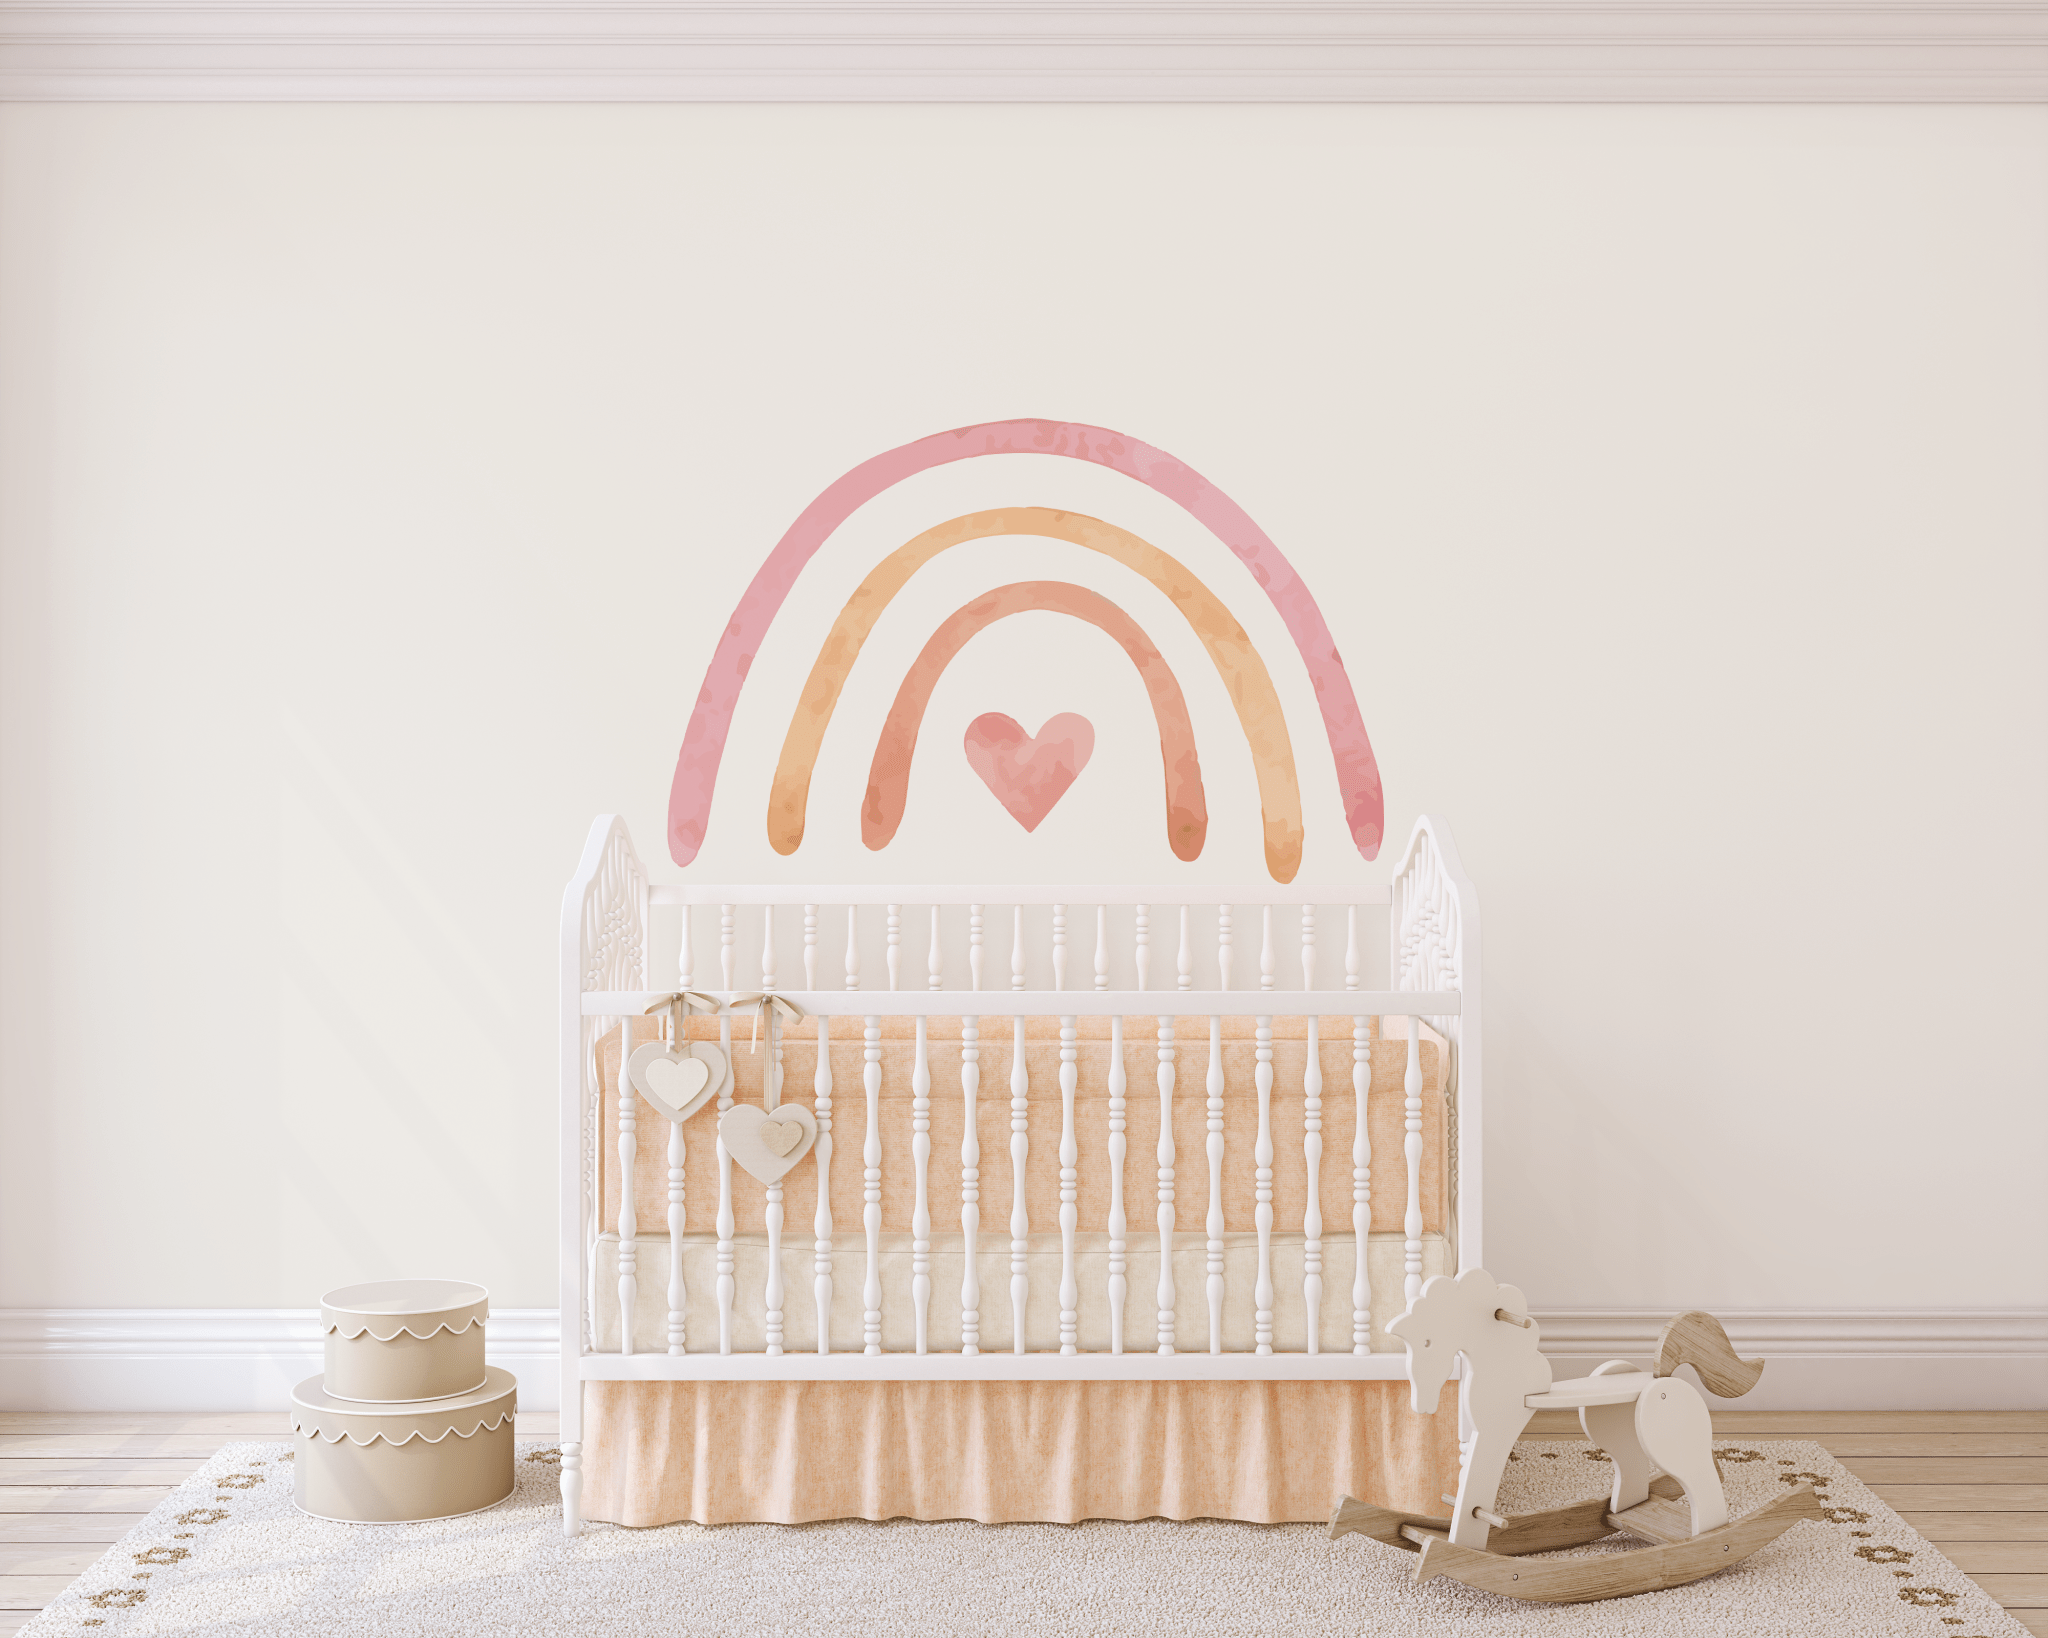 A nursery with a large pastel rainbow wall sticker positioned above a classic white crib. The crib has a beige blanket, and nearby is a white rocking horse toy. The floor is adorned with a soft rug and there's a pair of decorative white hearts hanging on the crib.